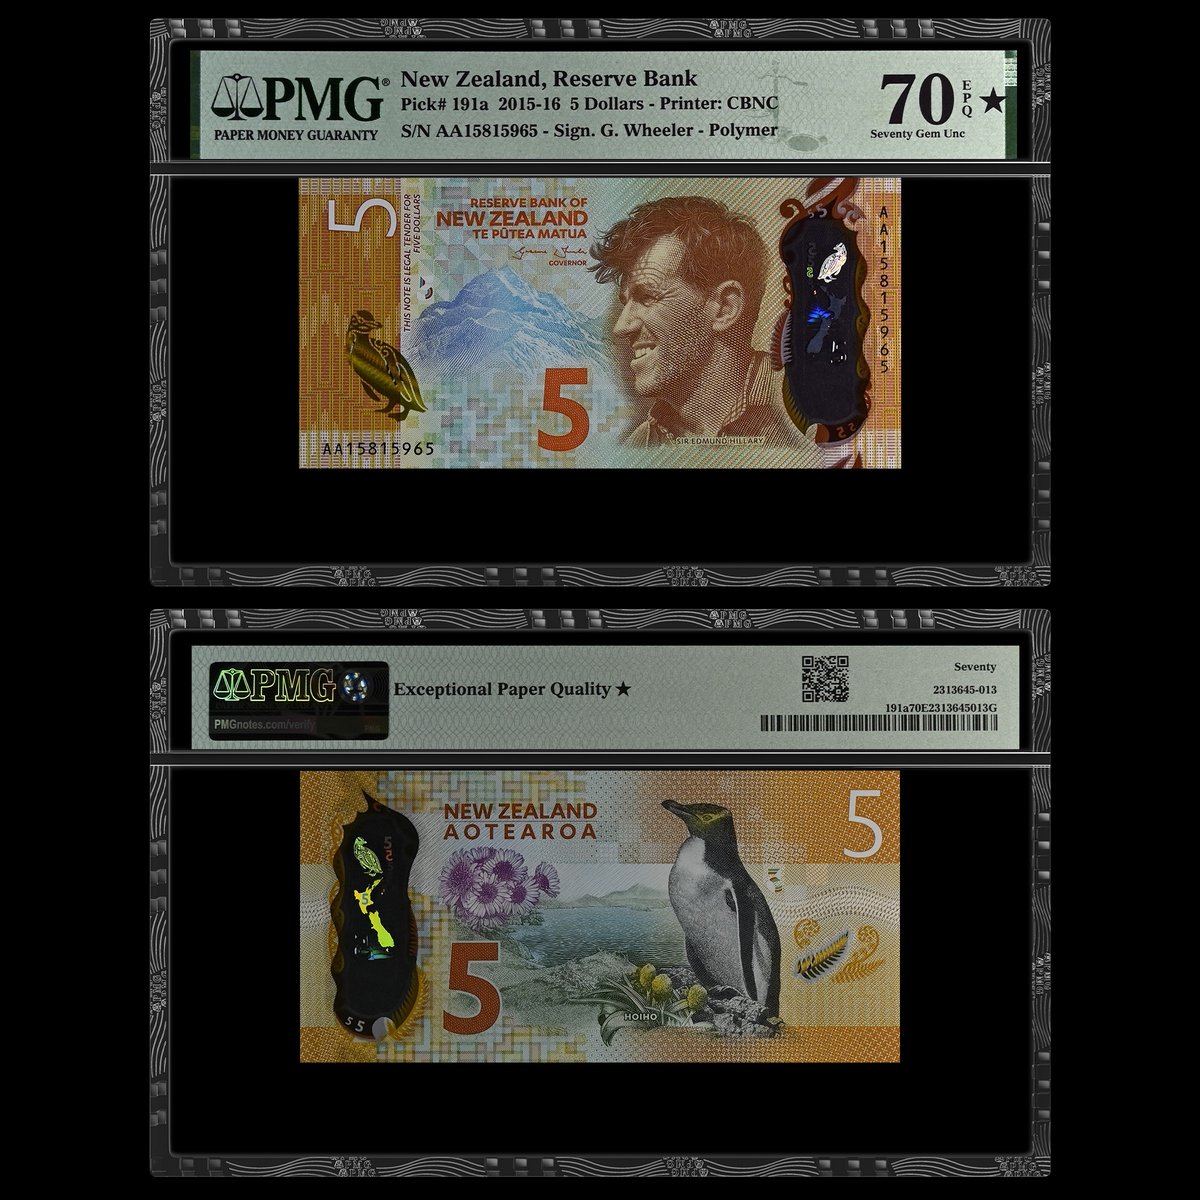 Note of the Day: Another #SuperSunday means another banknote of unsurpassed quality on display. Check out this marvelous New Zealand, Reserve Bank 2015-16 5 Dollars graded PMG 70★ Gem Uncirculated EPQ. Explore more banknotes from around the world at PMG.click/pop